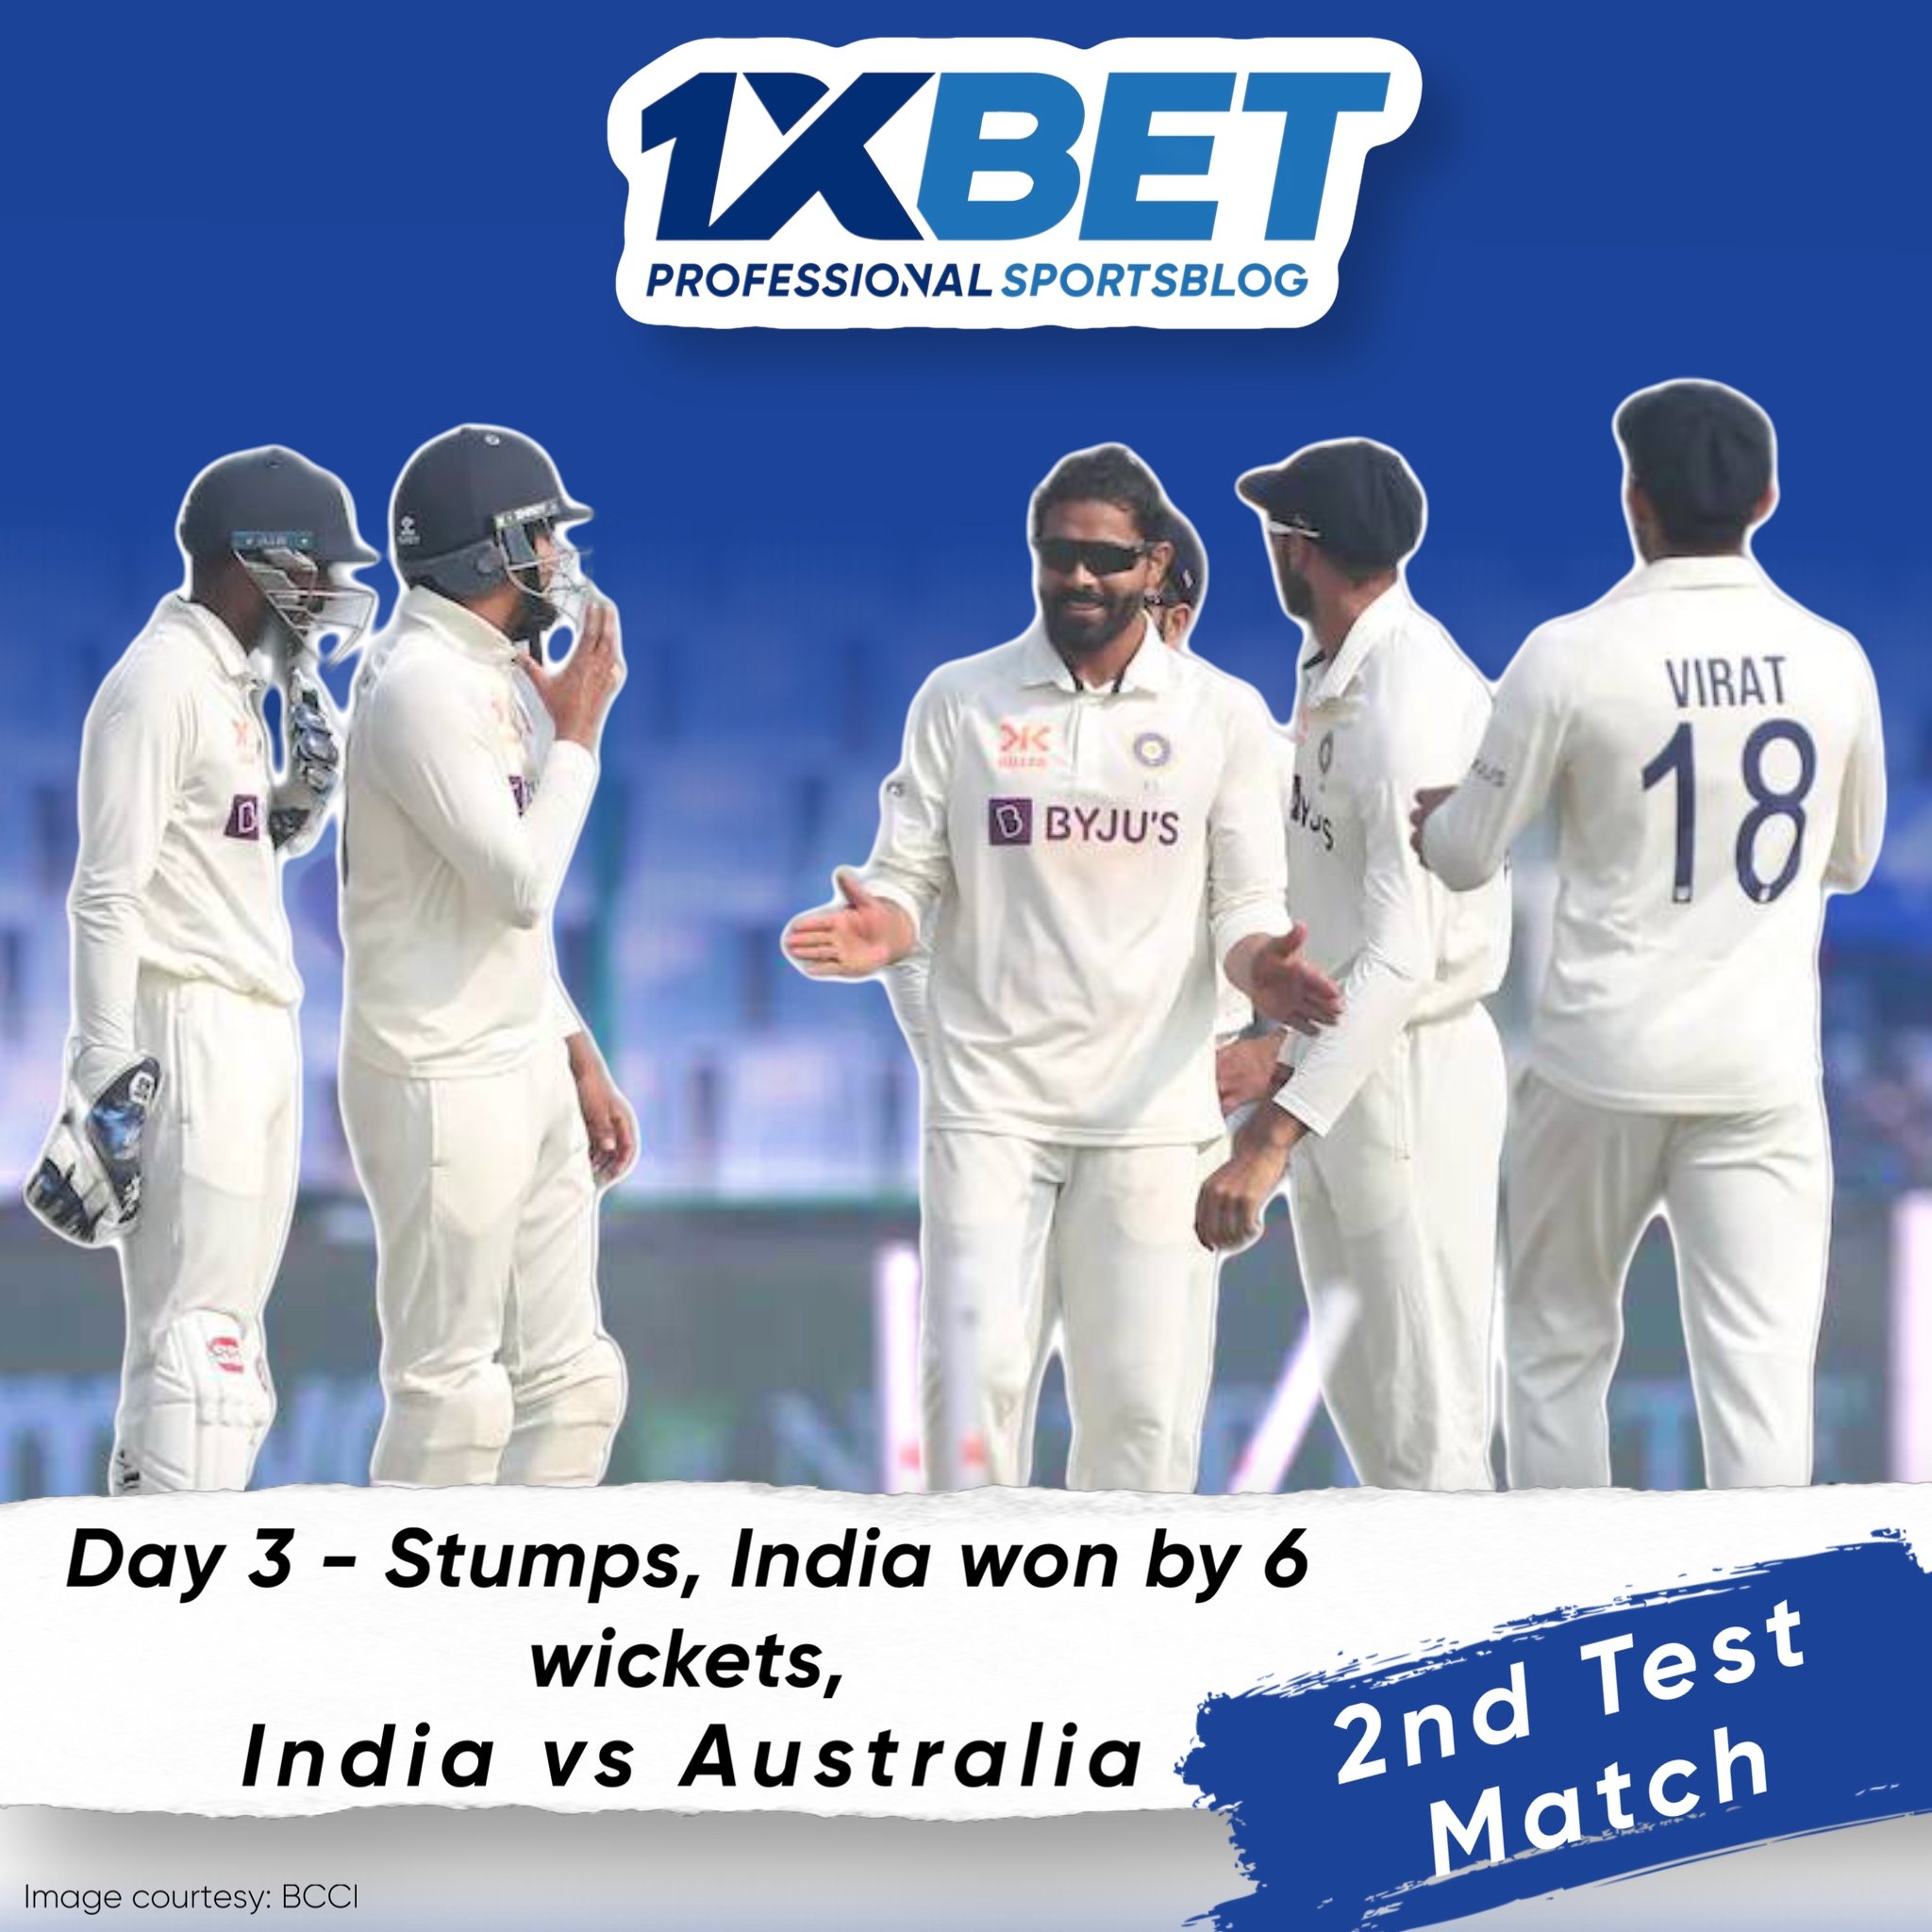 Day 3 - Stumps, India won by 6 wickets